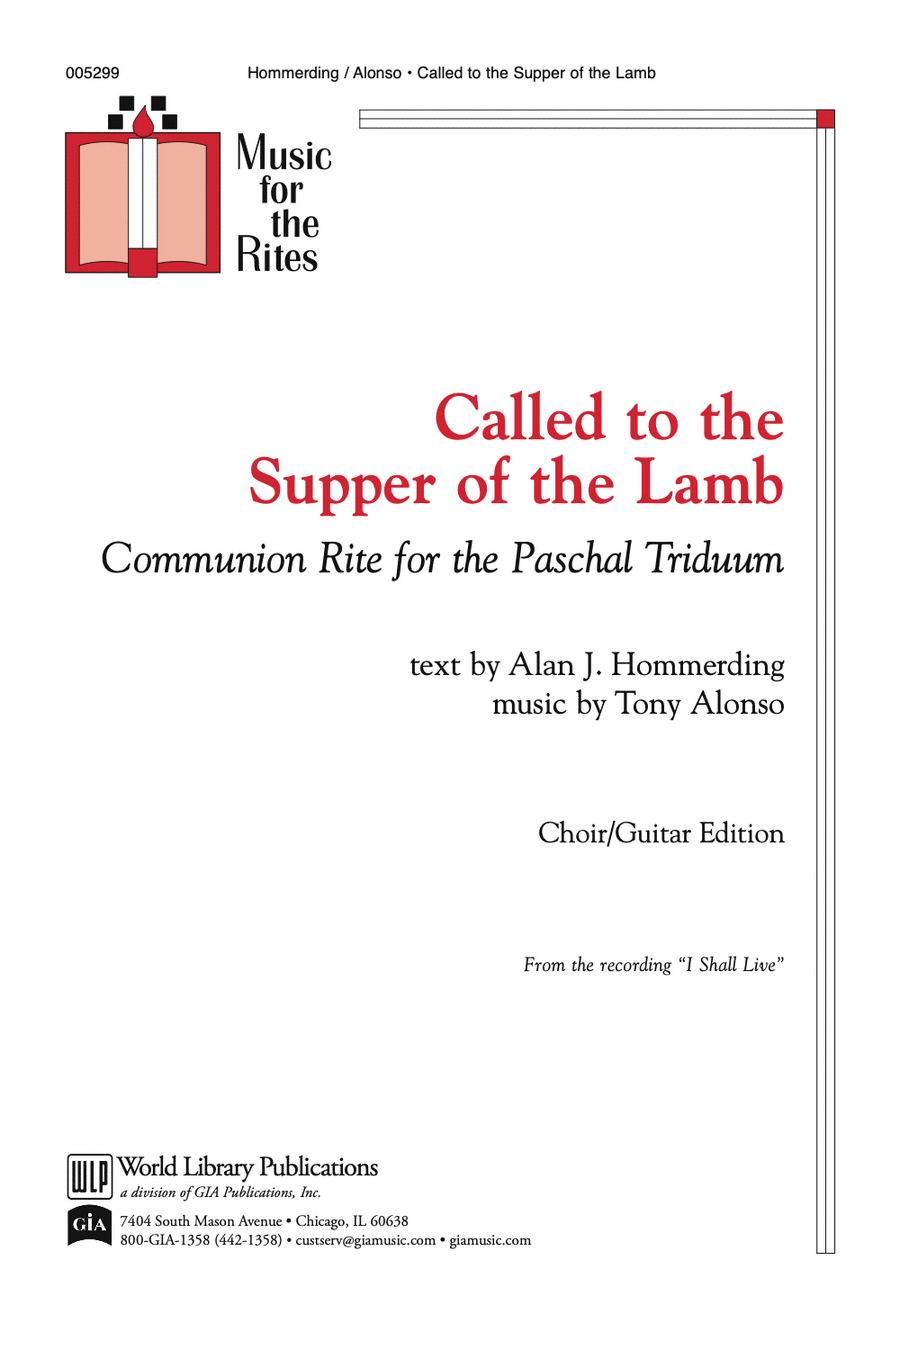 Called to the Supper of the Lamb-Choral/Guitar Edition